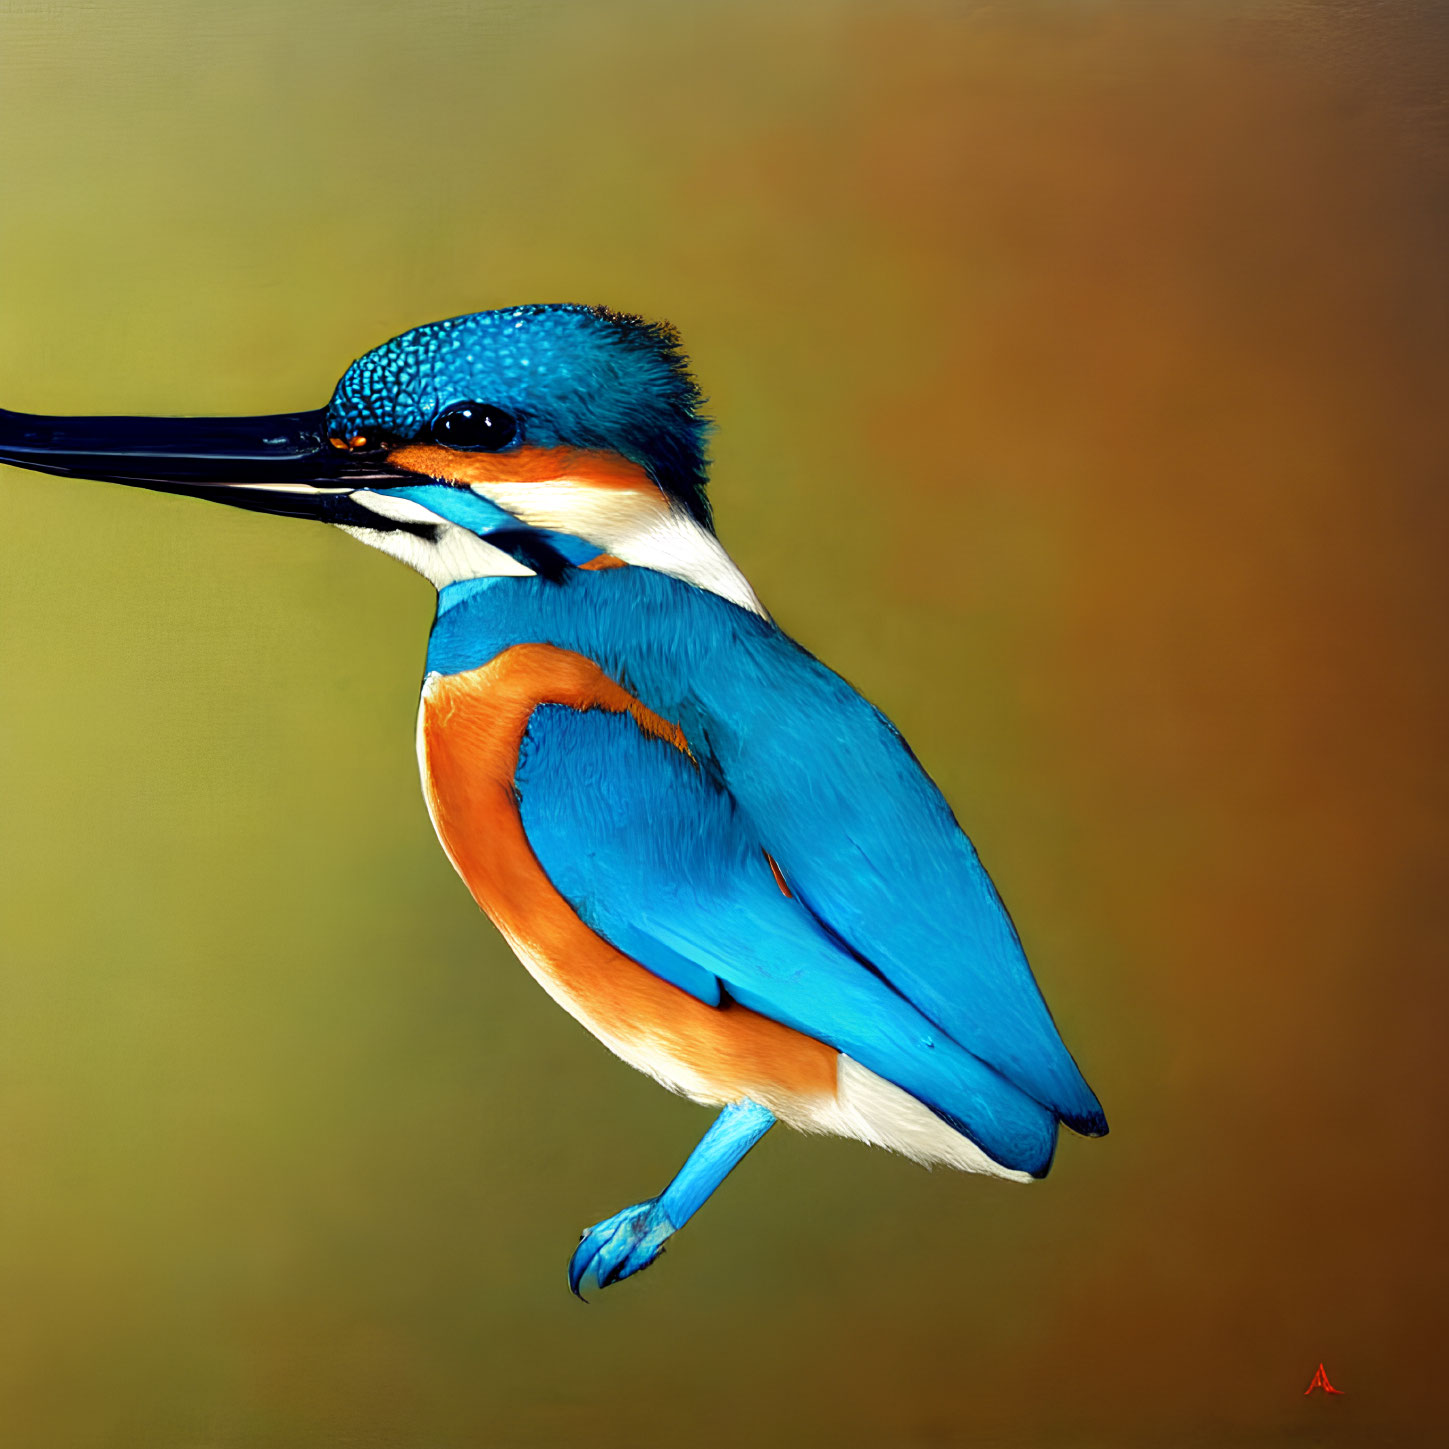 Colorful Kingfisher Painting on Gradient Background